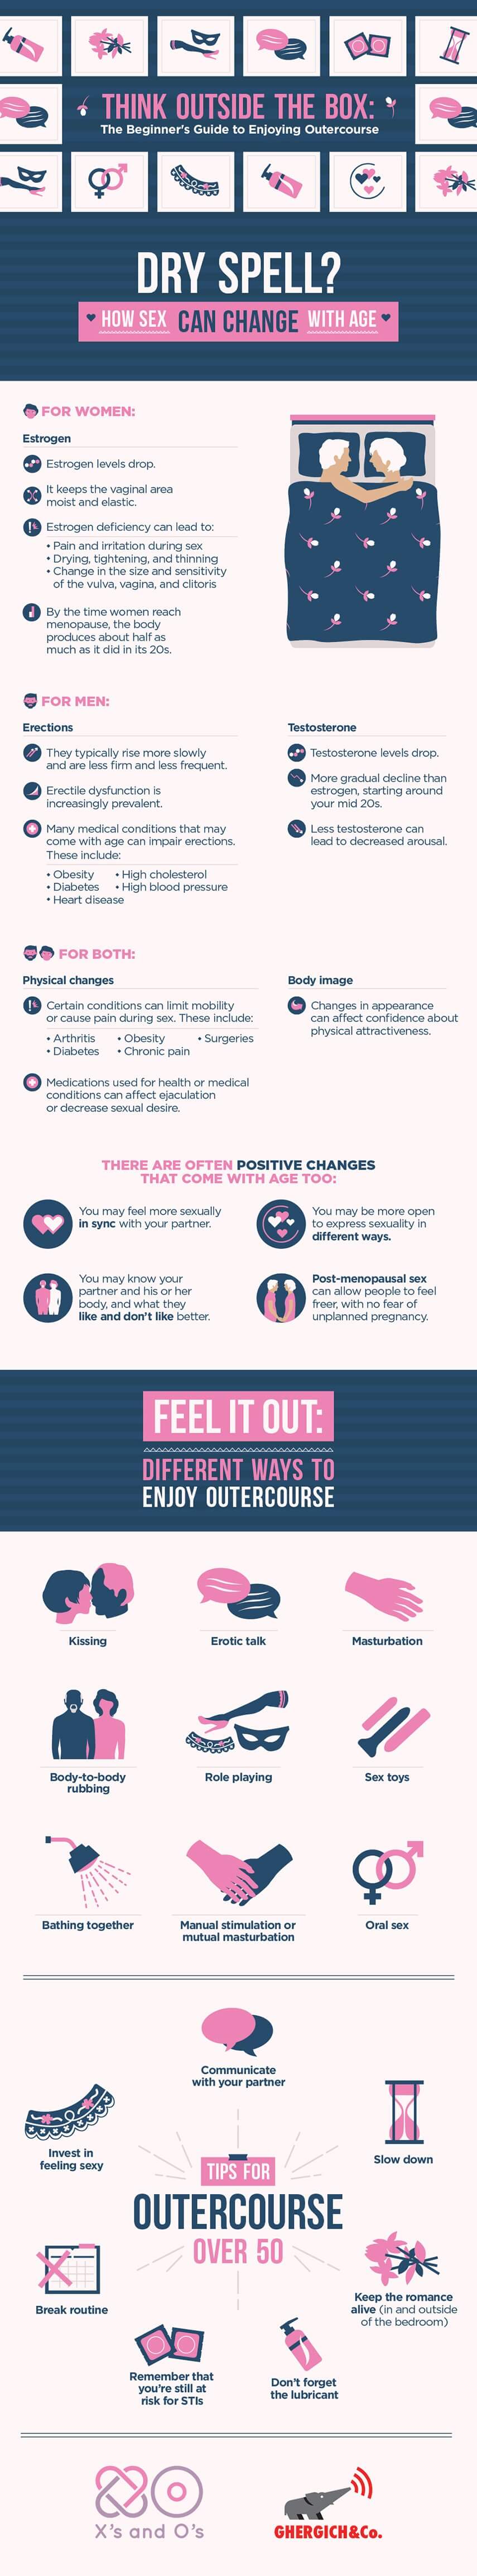 Outercourse sex infographic